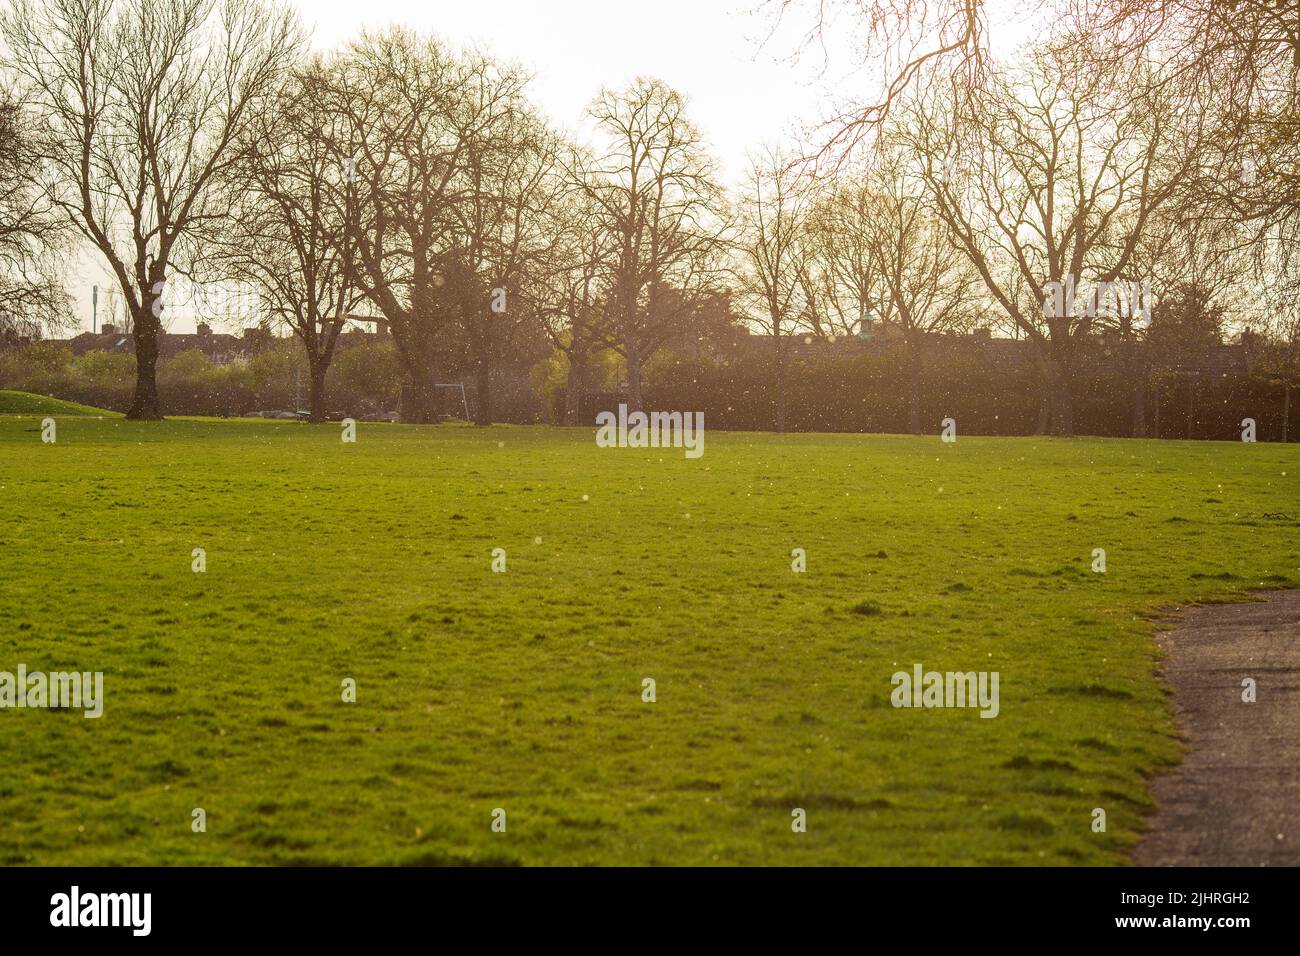 Flakes of snow are seen falling in a park in East London. Stock Photo